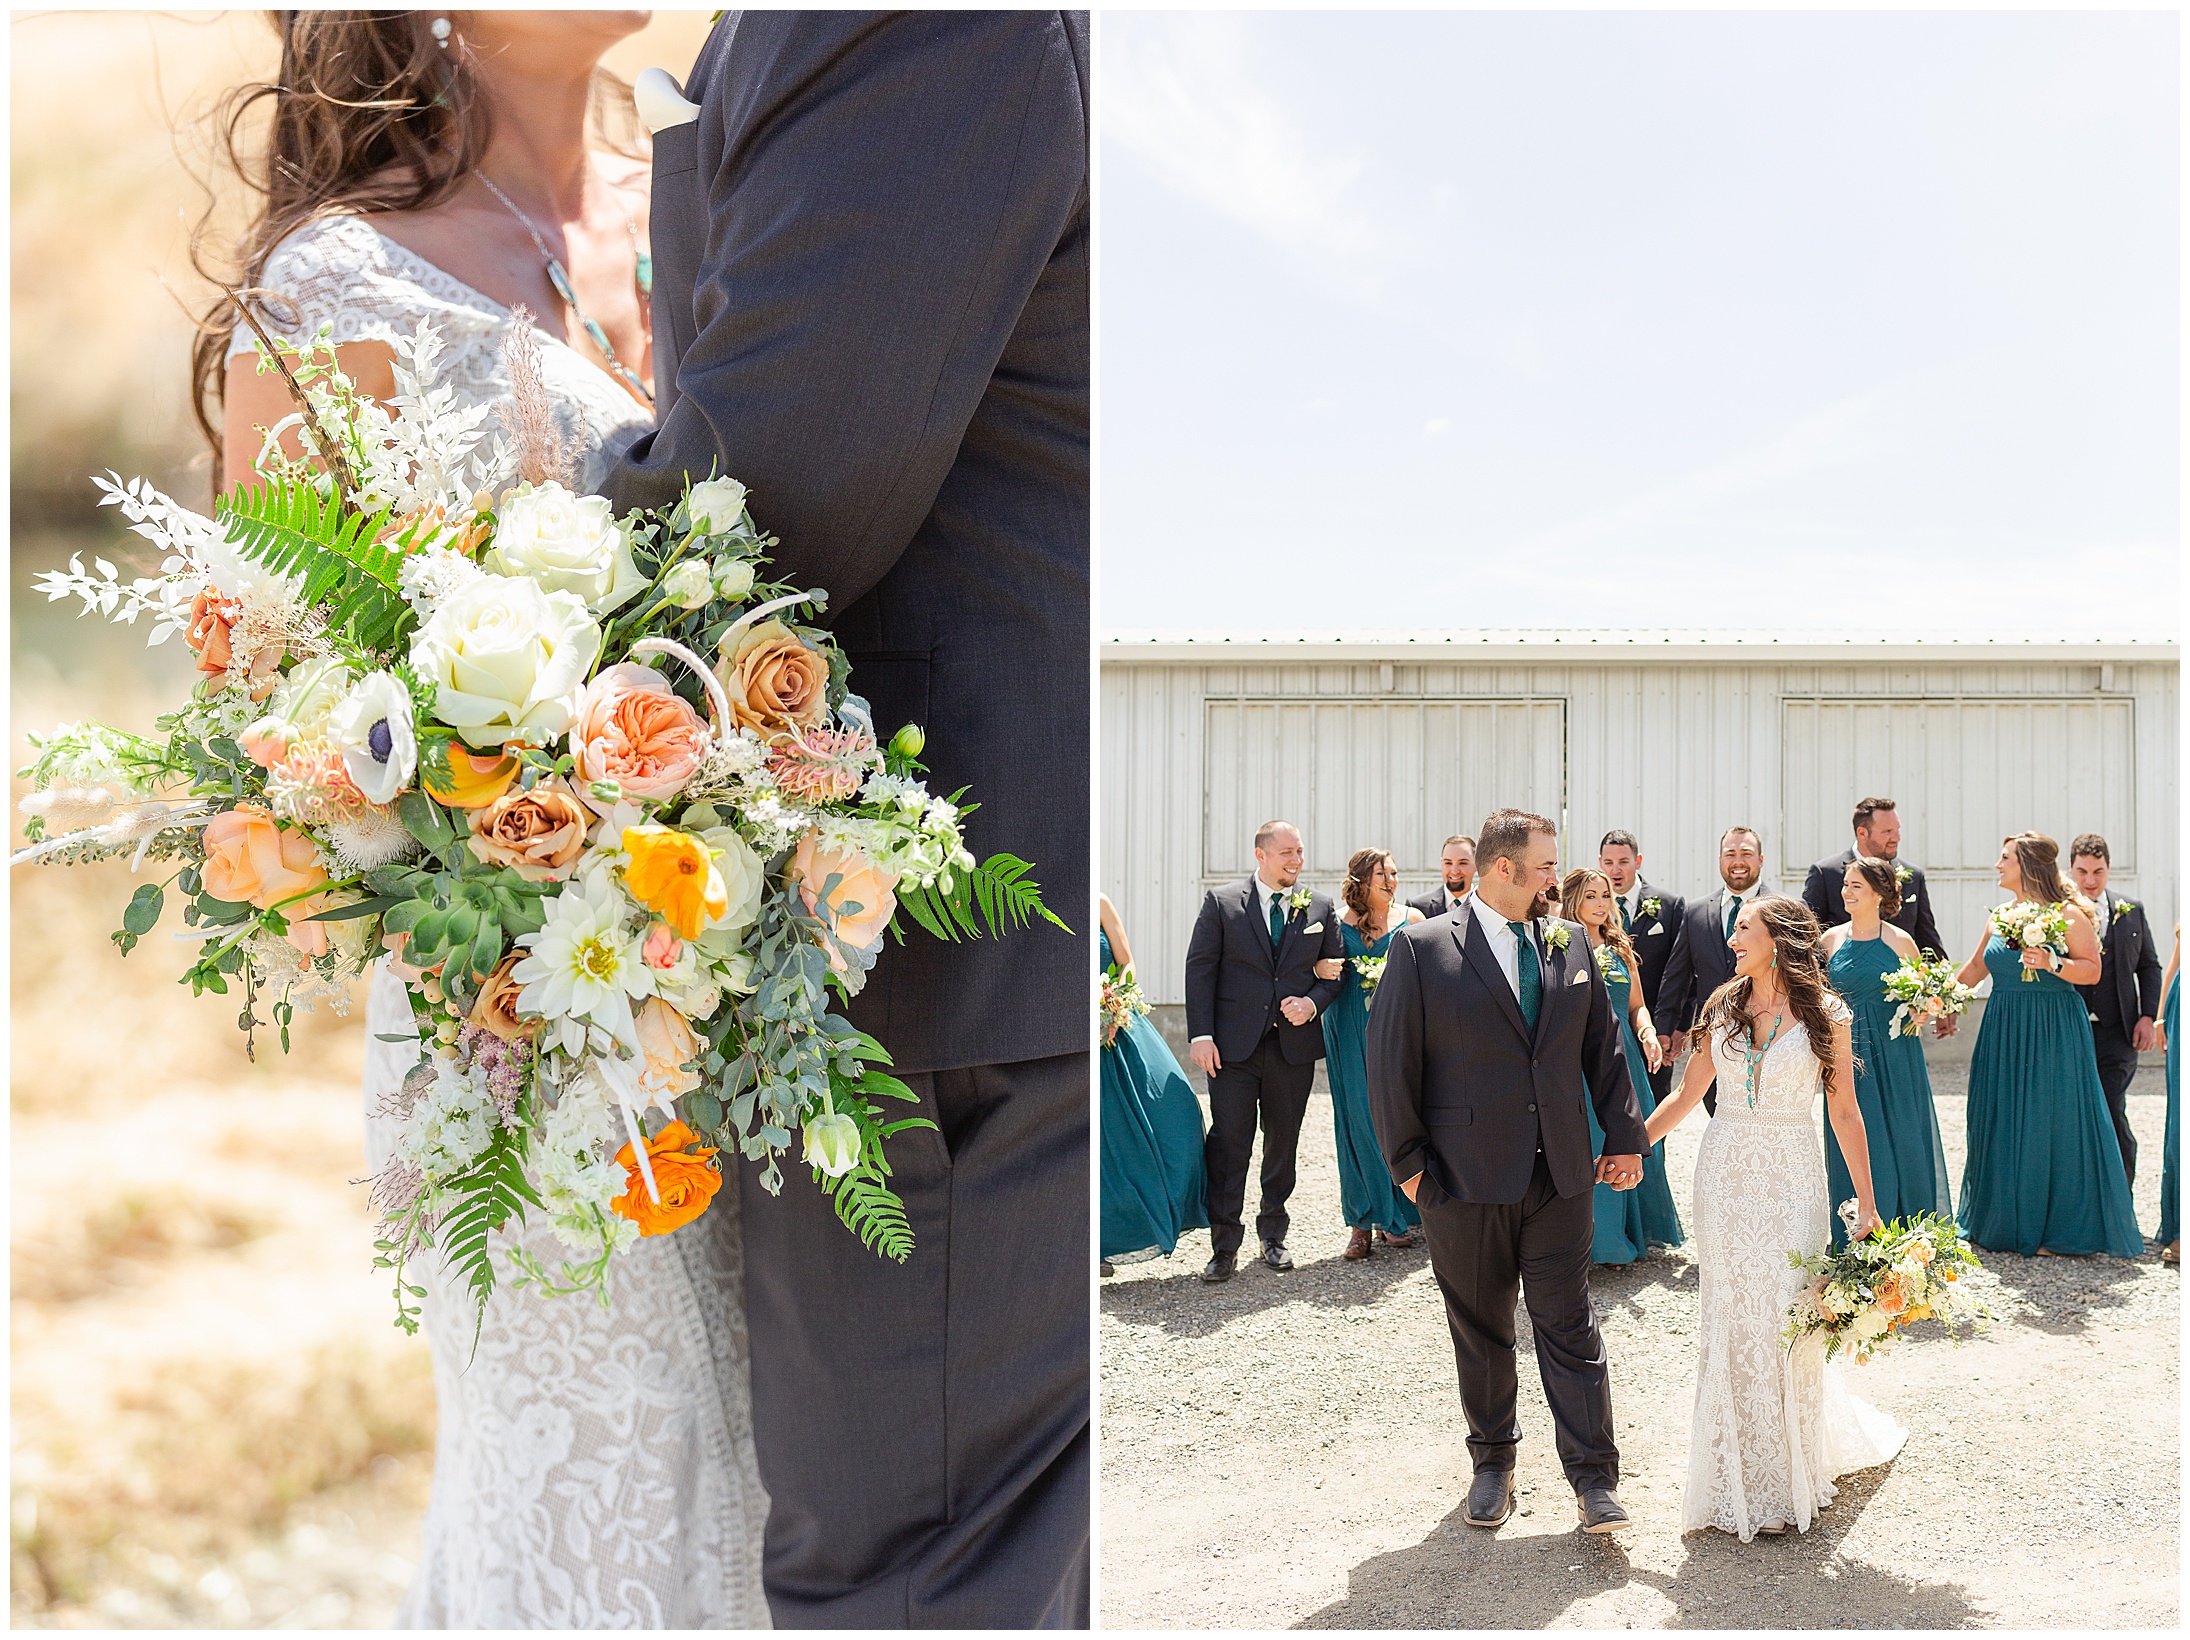 Private Estate Dairy Farm Country Wedding Willows CA Peacock Teal Dresses Cowboy Boots Horse Dog,